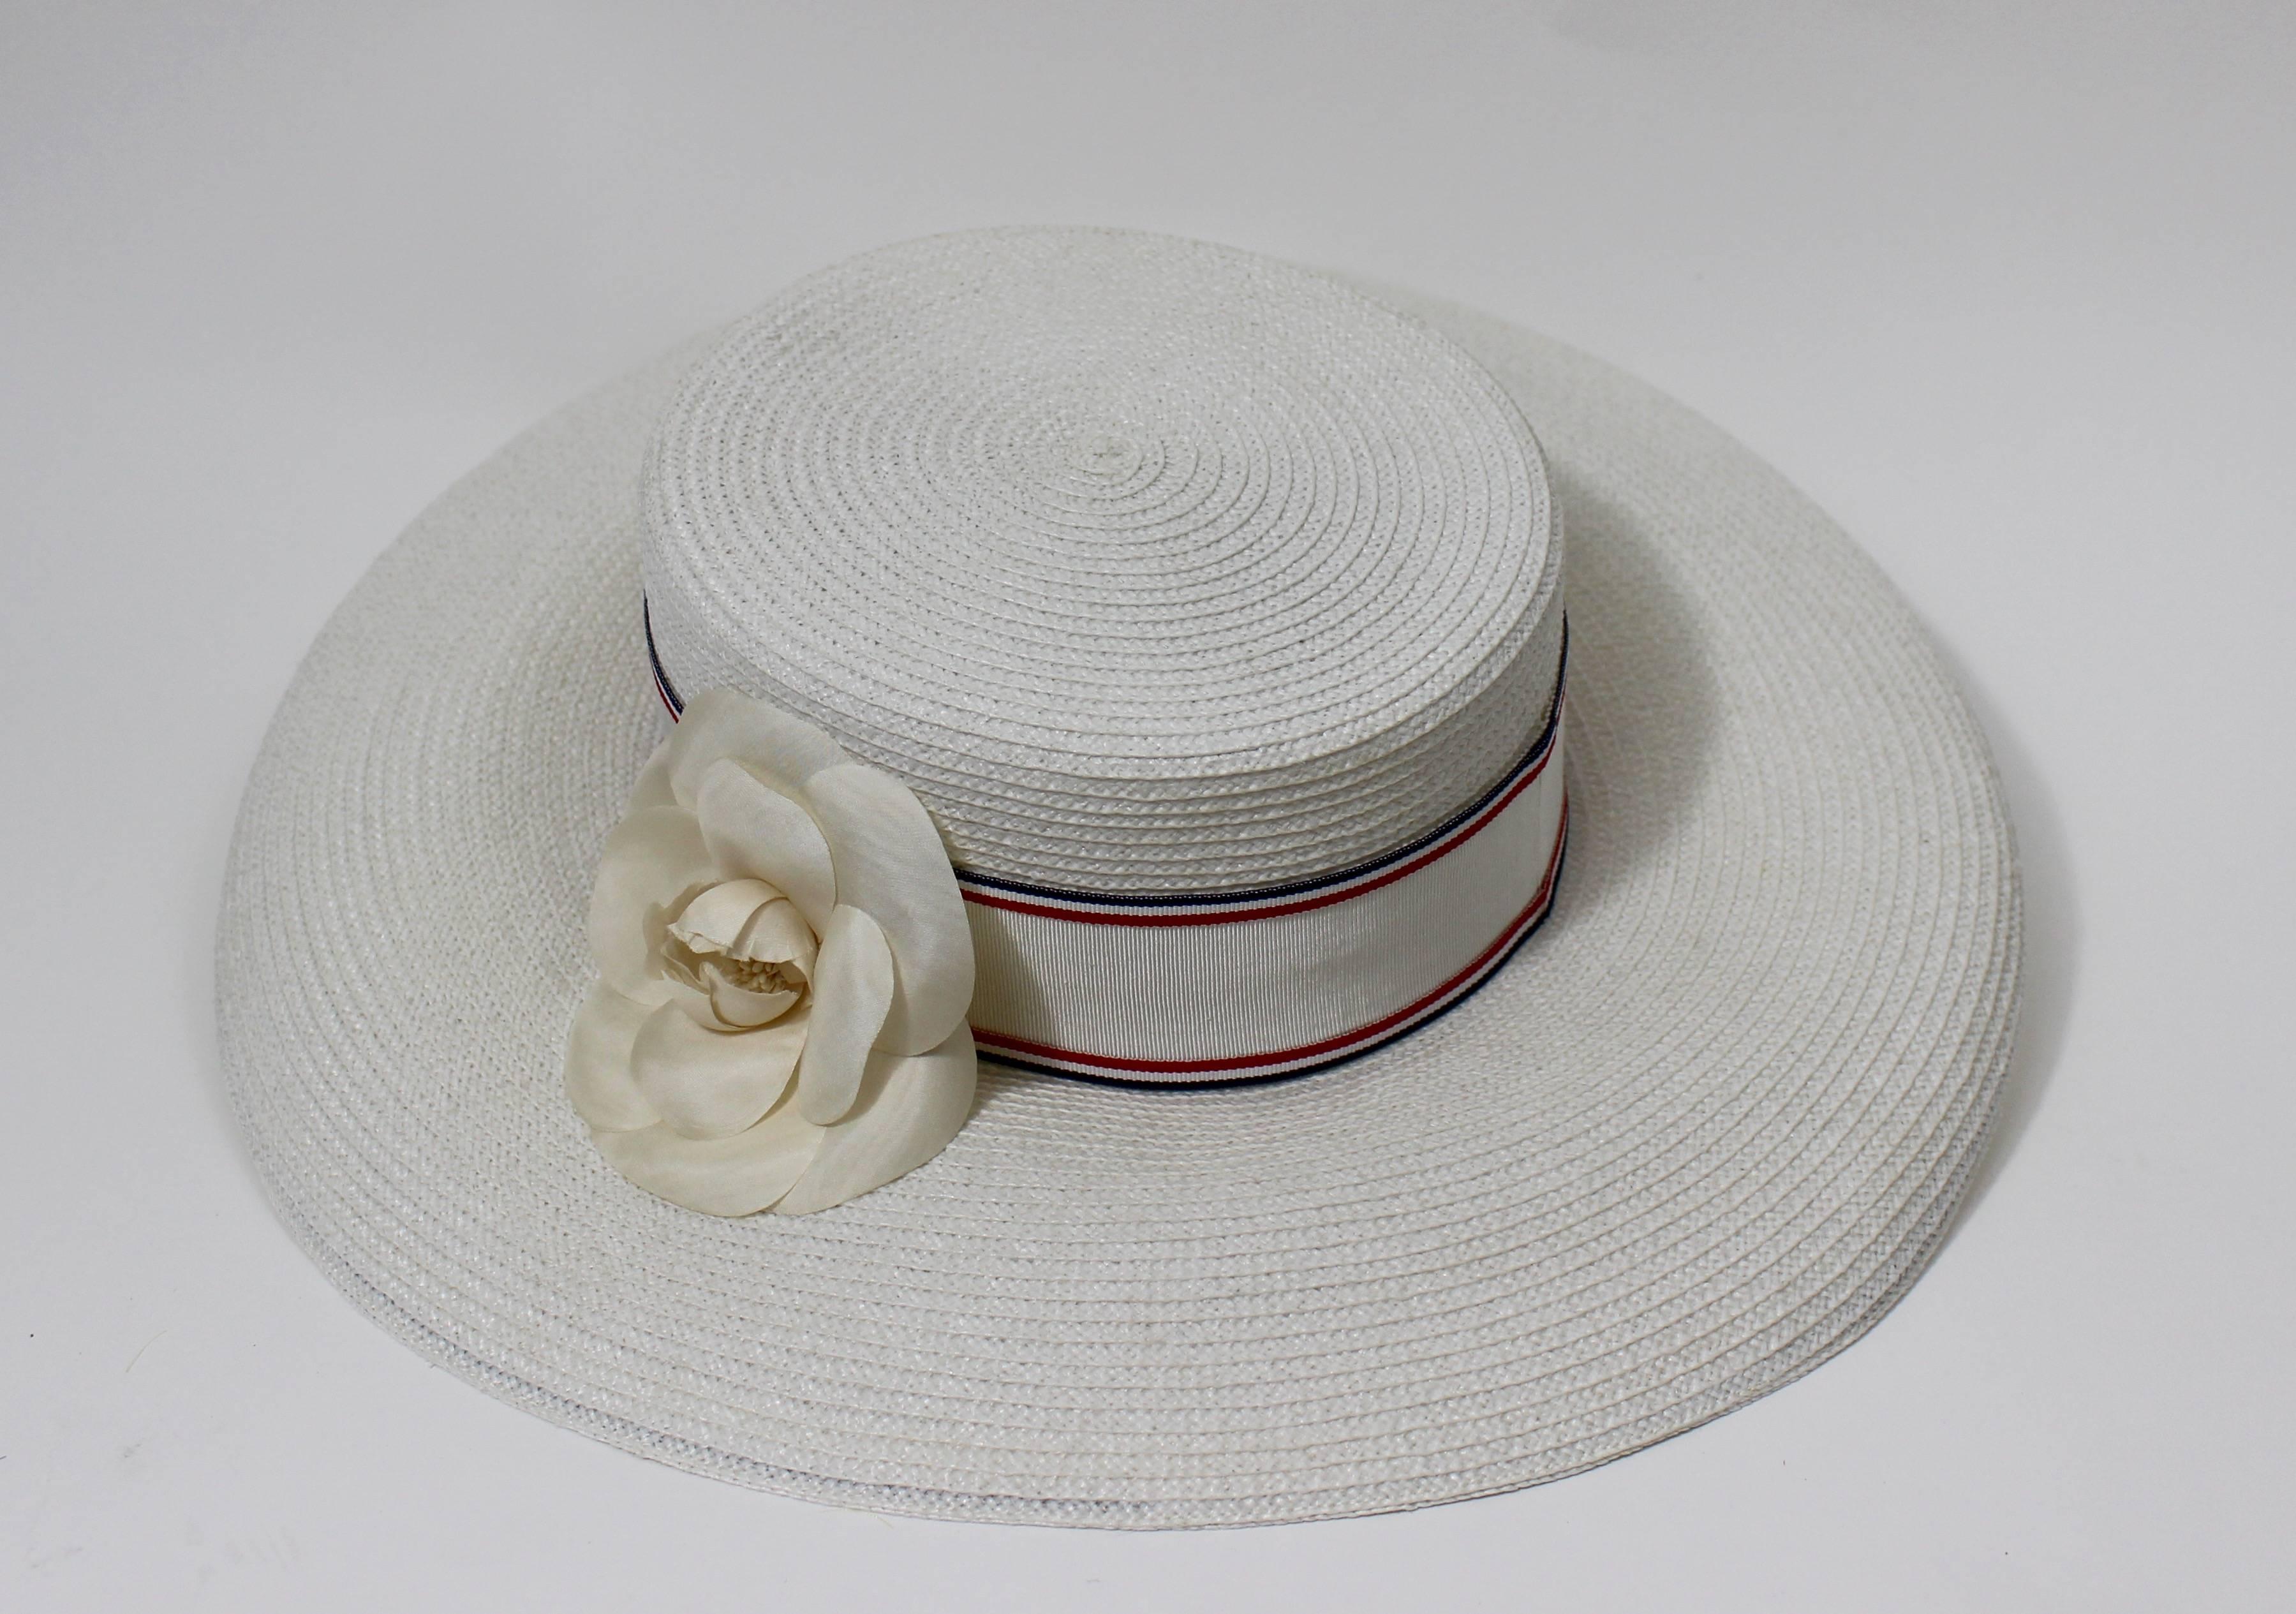 A vintage Chanel white woven hat. 
Grosgrain ribbon band with red and blue stripes.
Camellia Flower.

Excellent condition.
Size: 57

Measurements:
Inner circumference: 21.5 inches
Crown: 3 and 1/4 inches tall
Brim: 4.5 inches